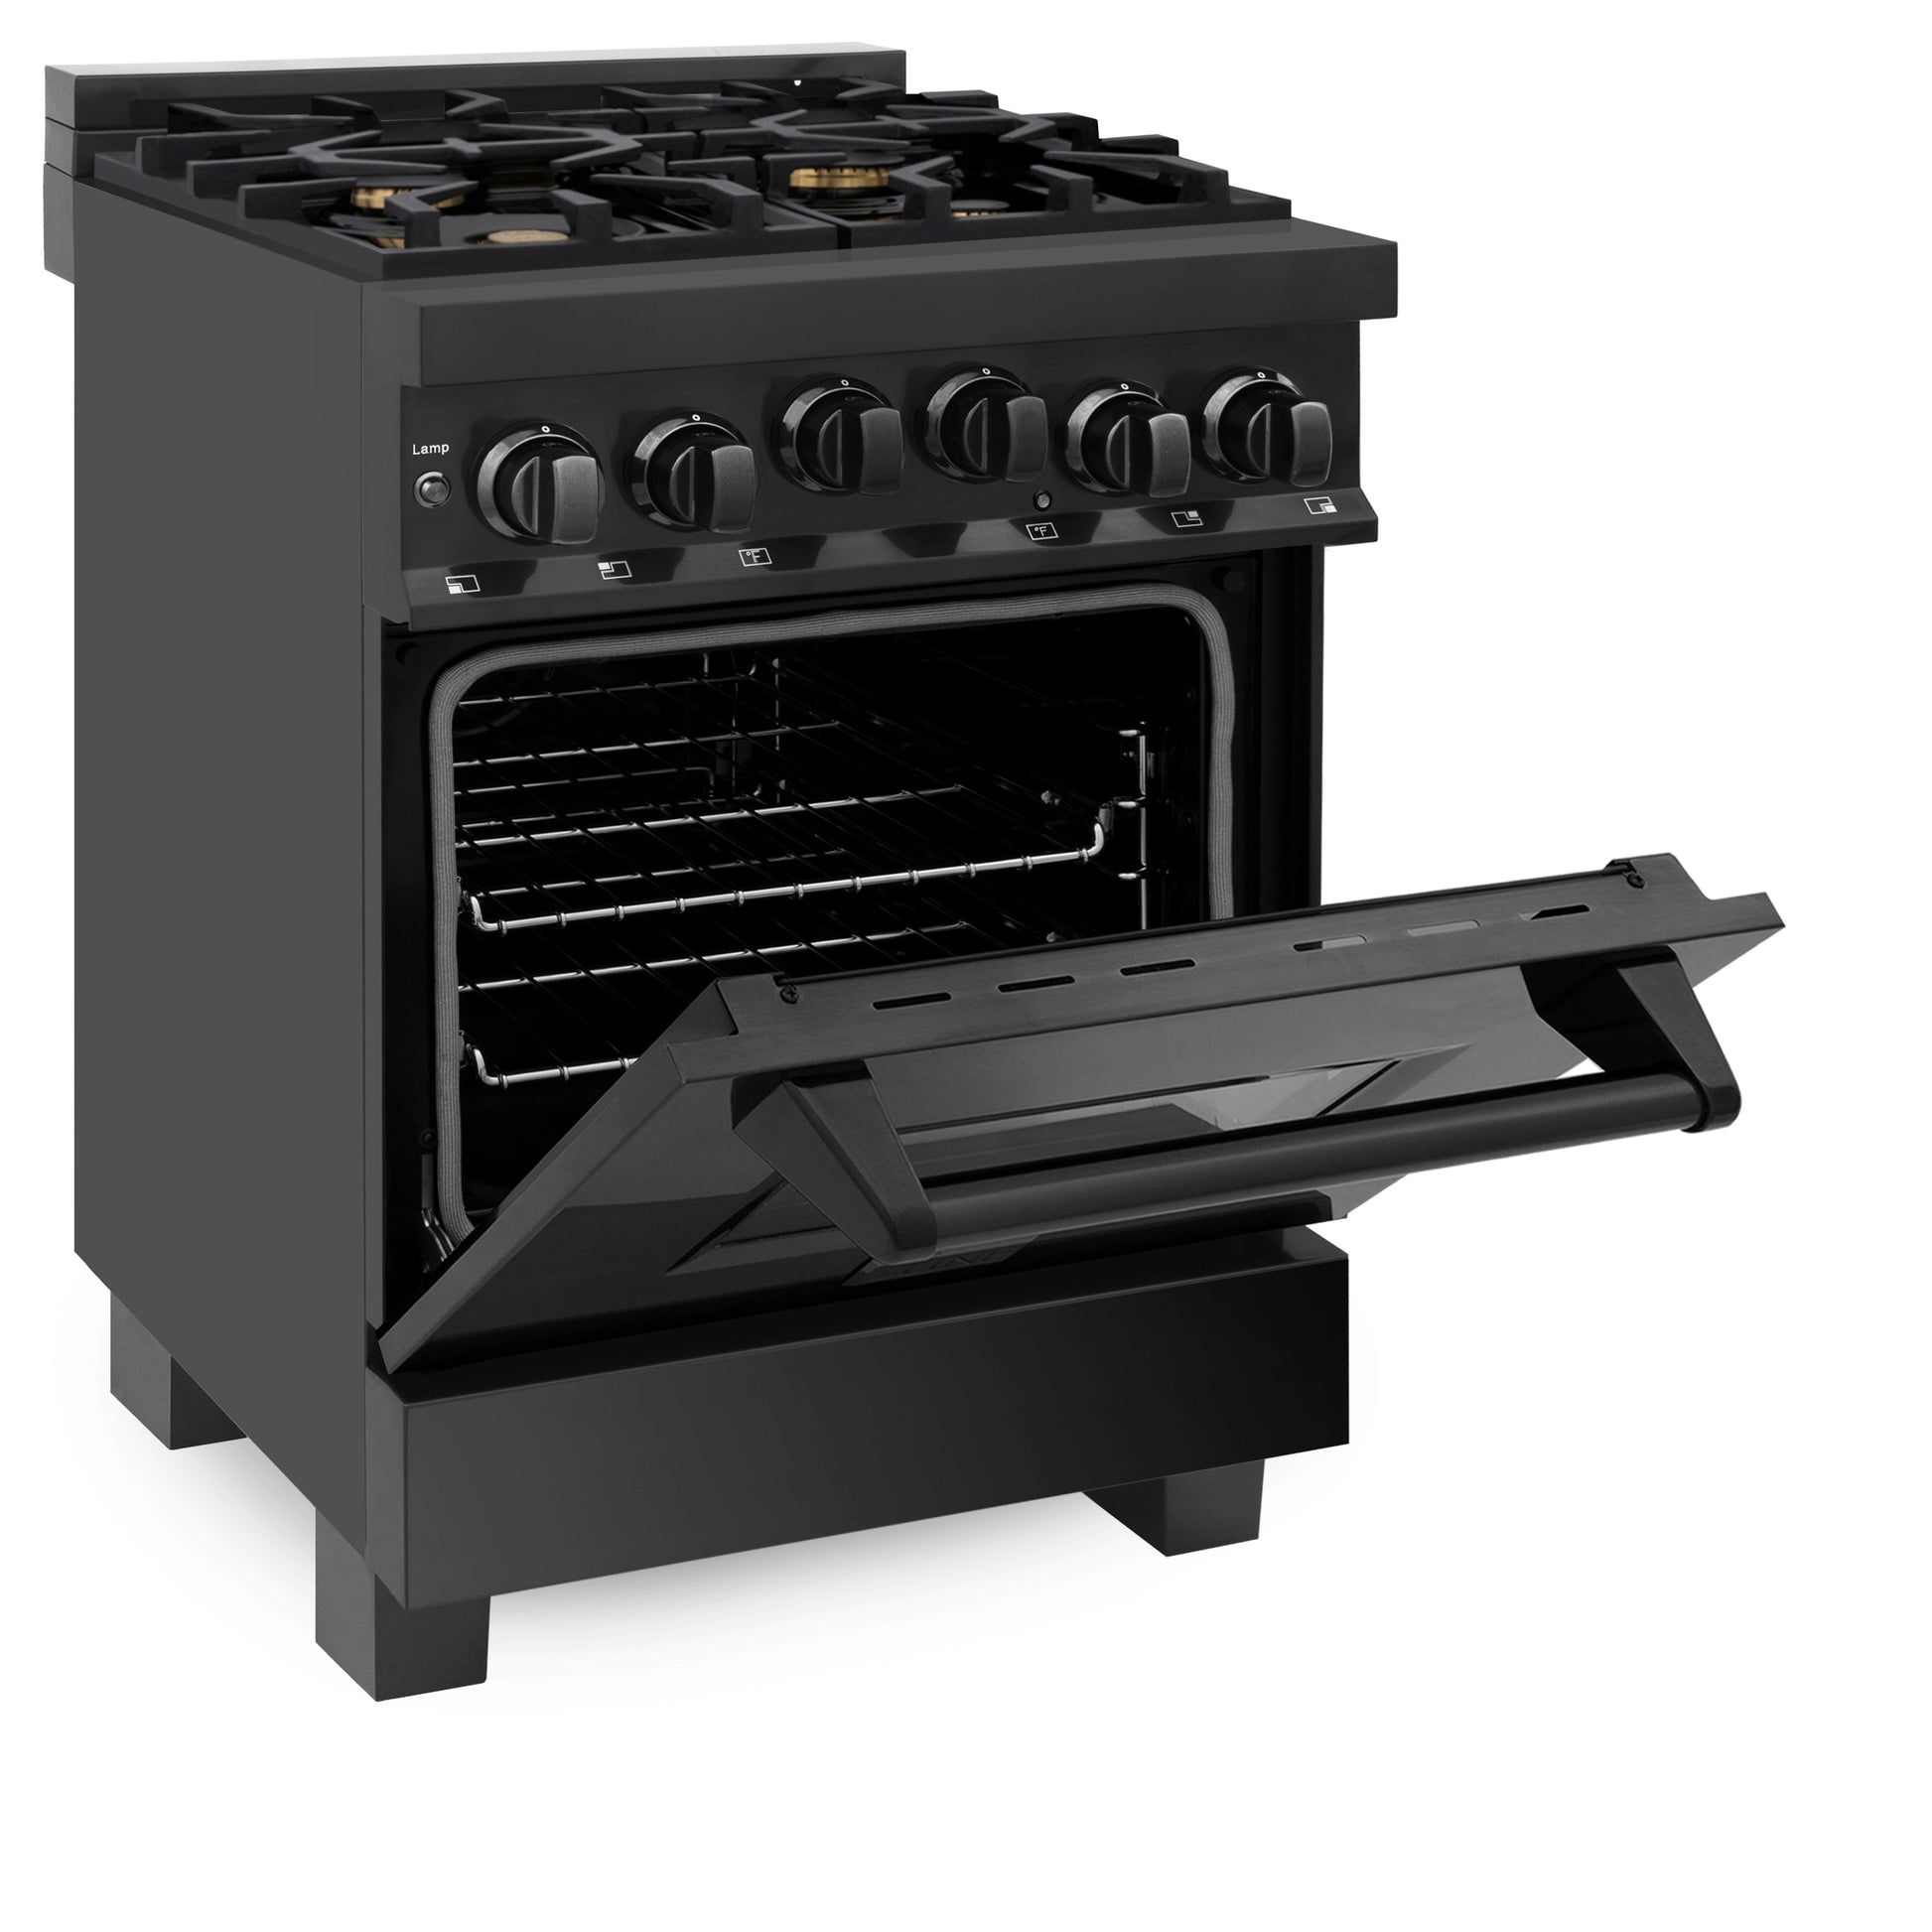 ZLINE 24" Range with Gas Stove and Oven - Black Stainless Steel